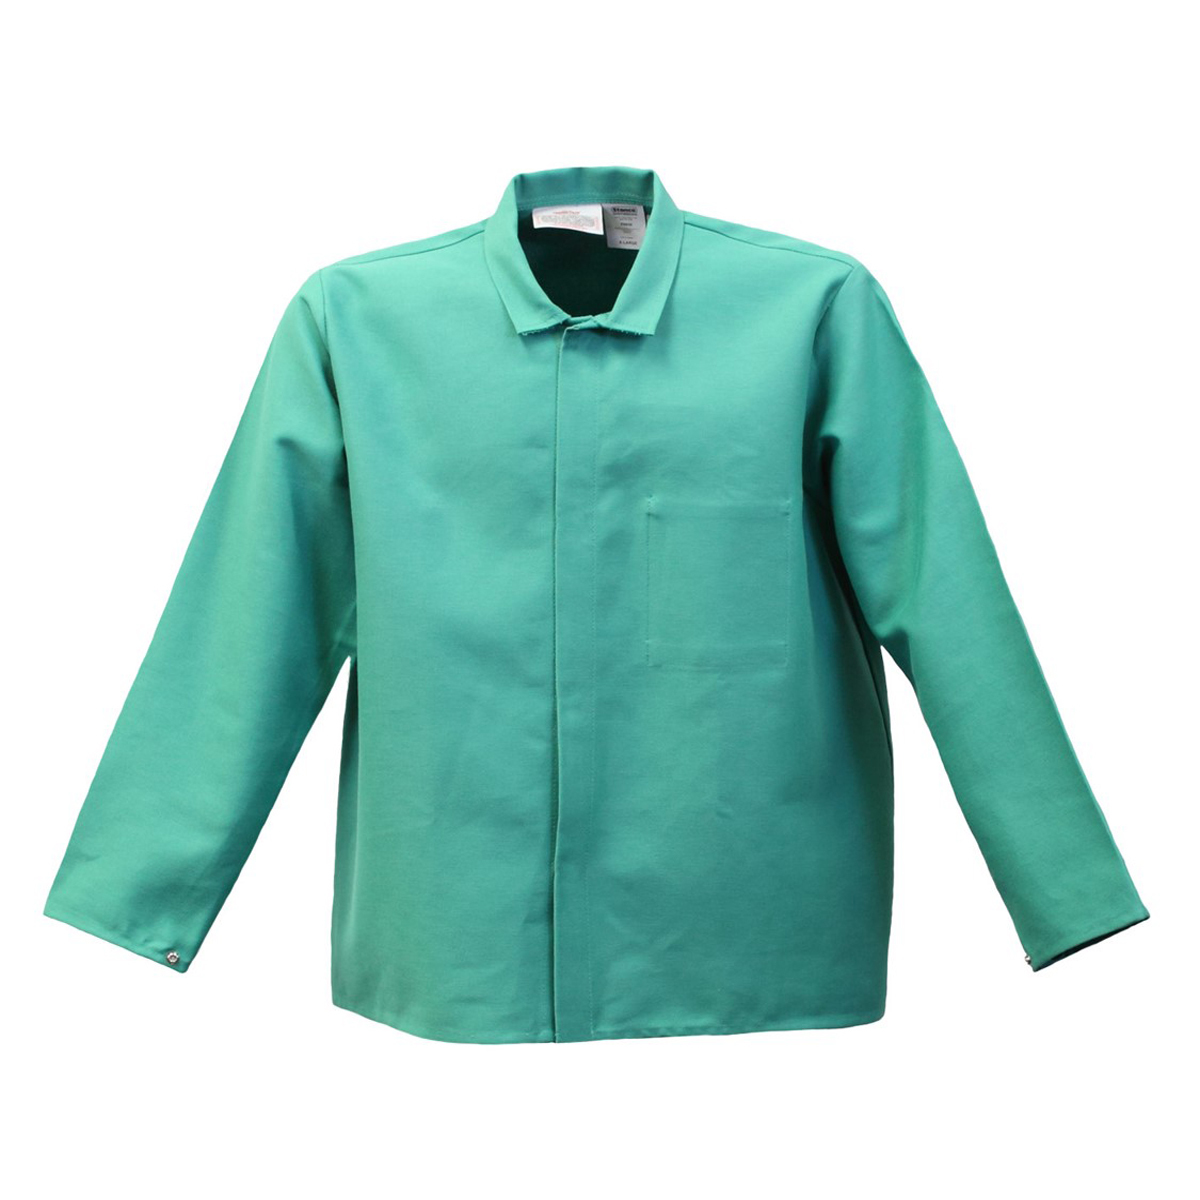 Stanco Safety Products™ 3X Green Cotton Flame Resistant Welding Jacket With Hook And Loop Closure And 2